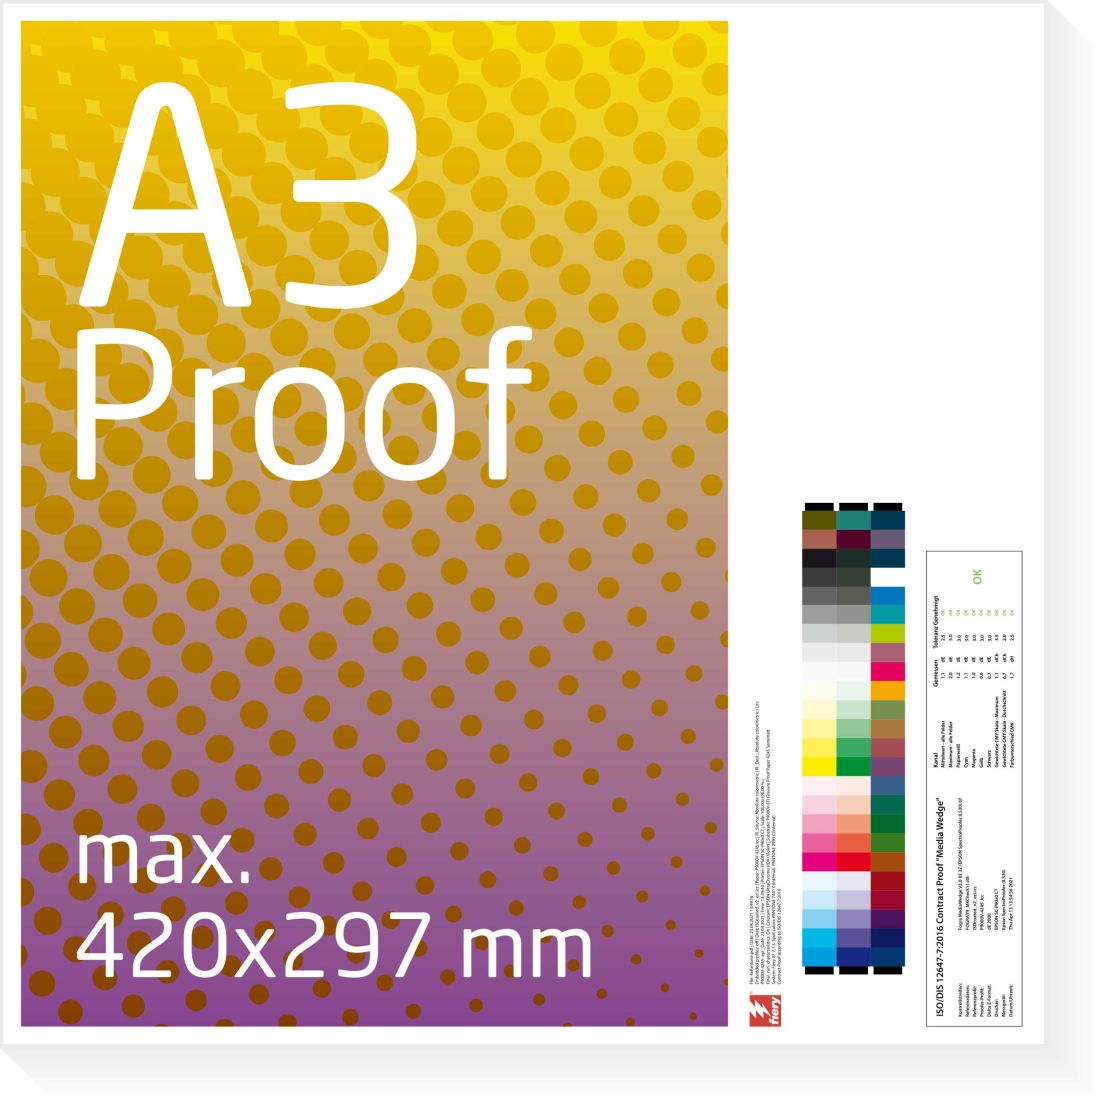 A3 Proof colour binding Digital Online Proof